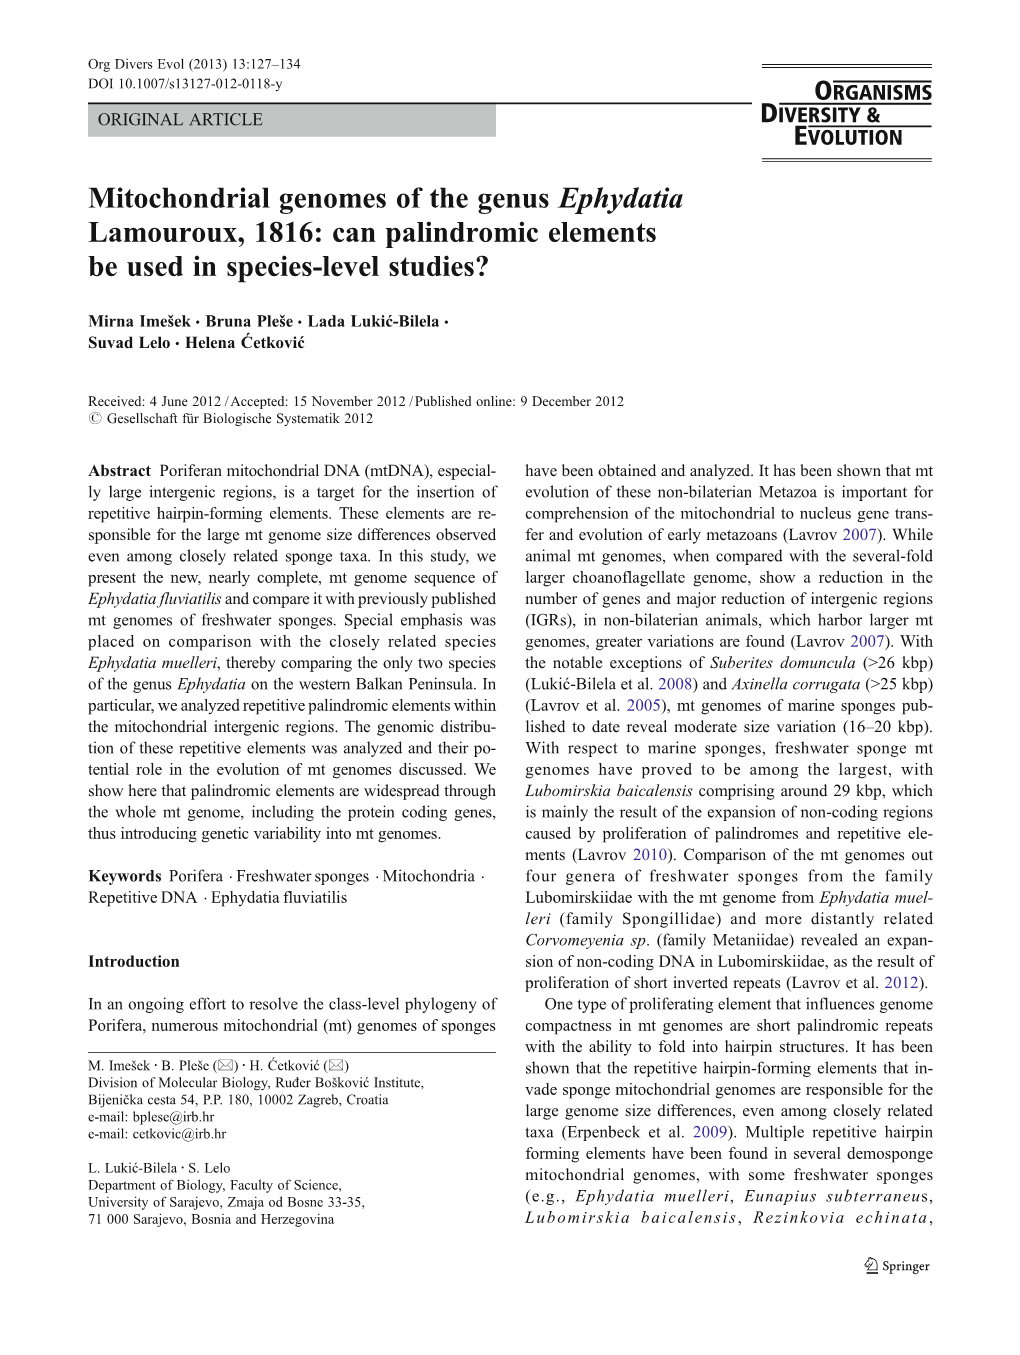 Mitochondrial Genomes of the Genus Ephydatia Lamouroux, 1816: Can Palindromic Elements Be Used in Species-Level Studies?